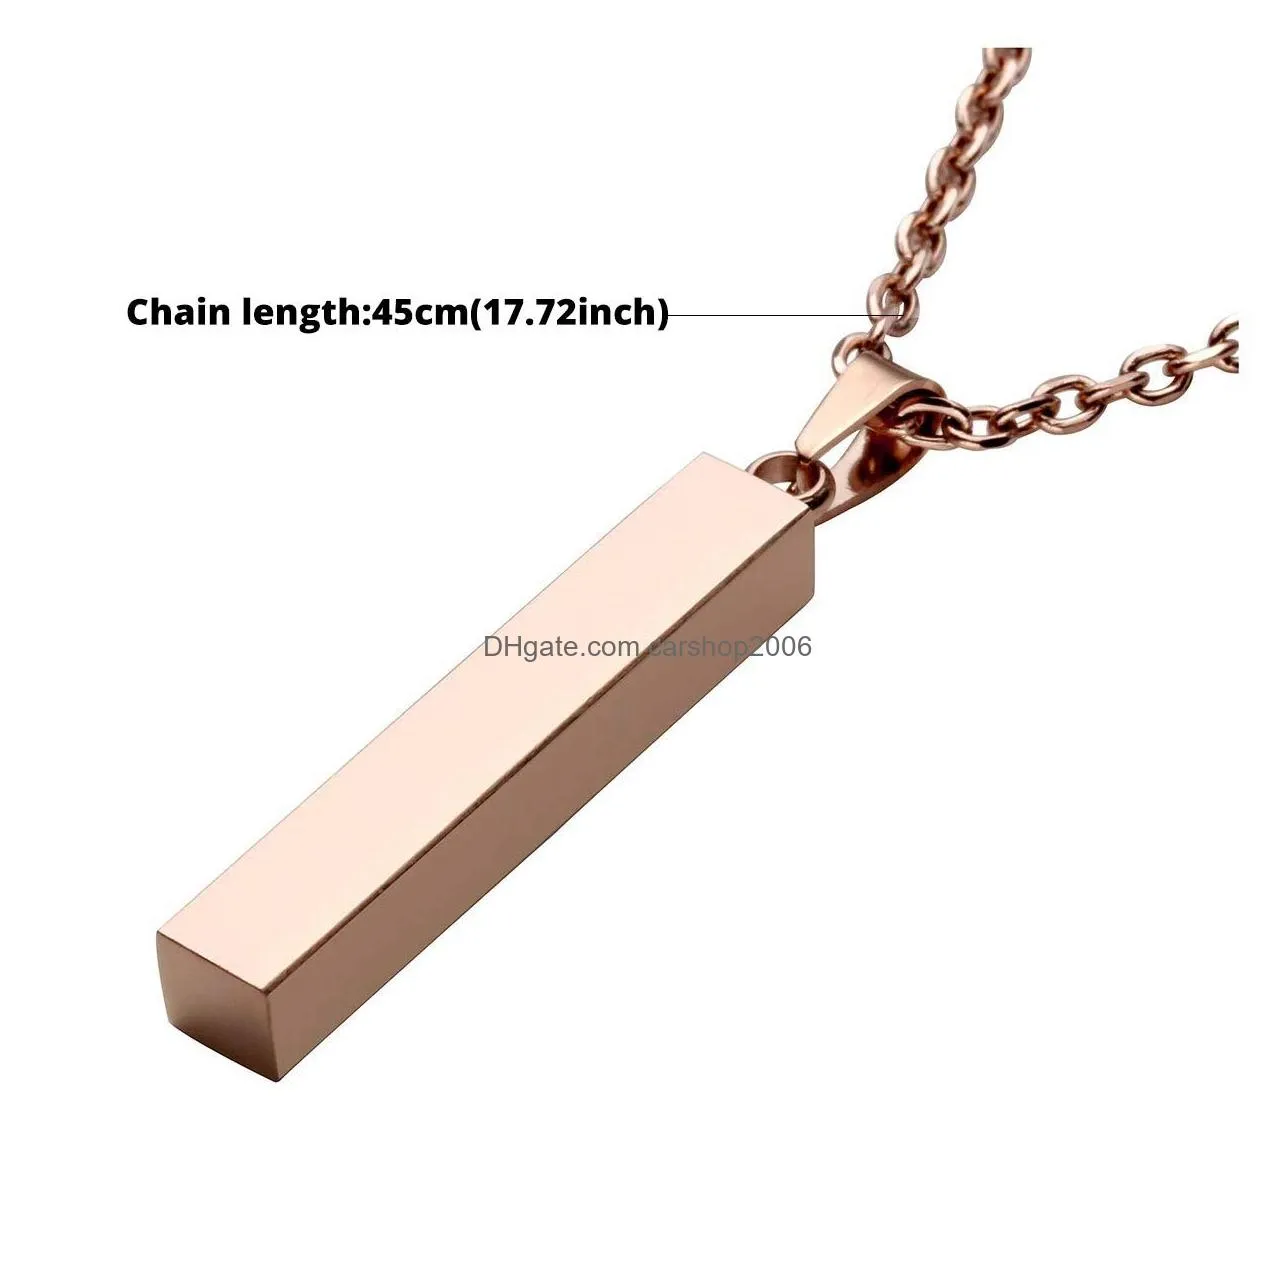 Pendant Necklaces Stainless Steel Square Bar Necklace New Personalized Gold Solid Blank Charm For Buyer Own Engraving Jewelry Drop Del Dhmjt